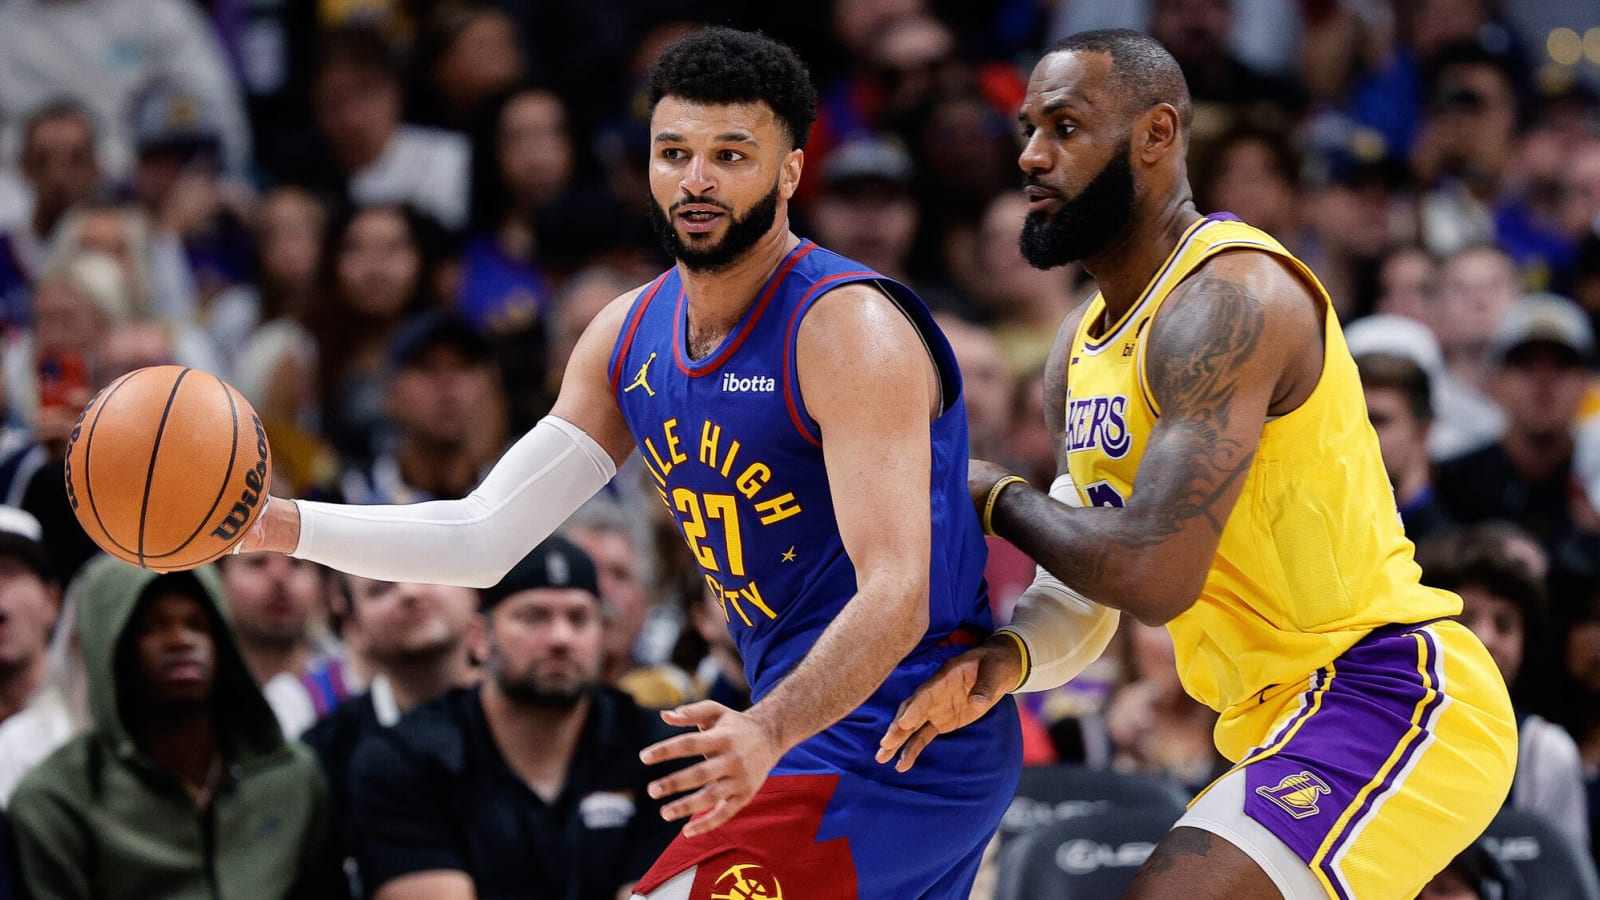 Jamal Murray sends message about LeBron James in Instagram post